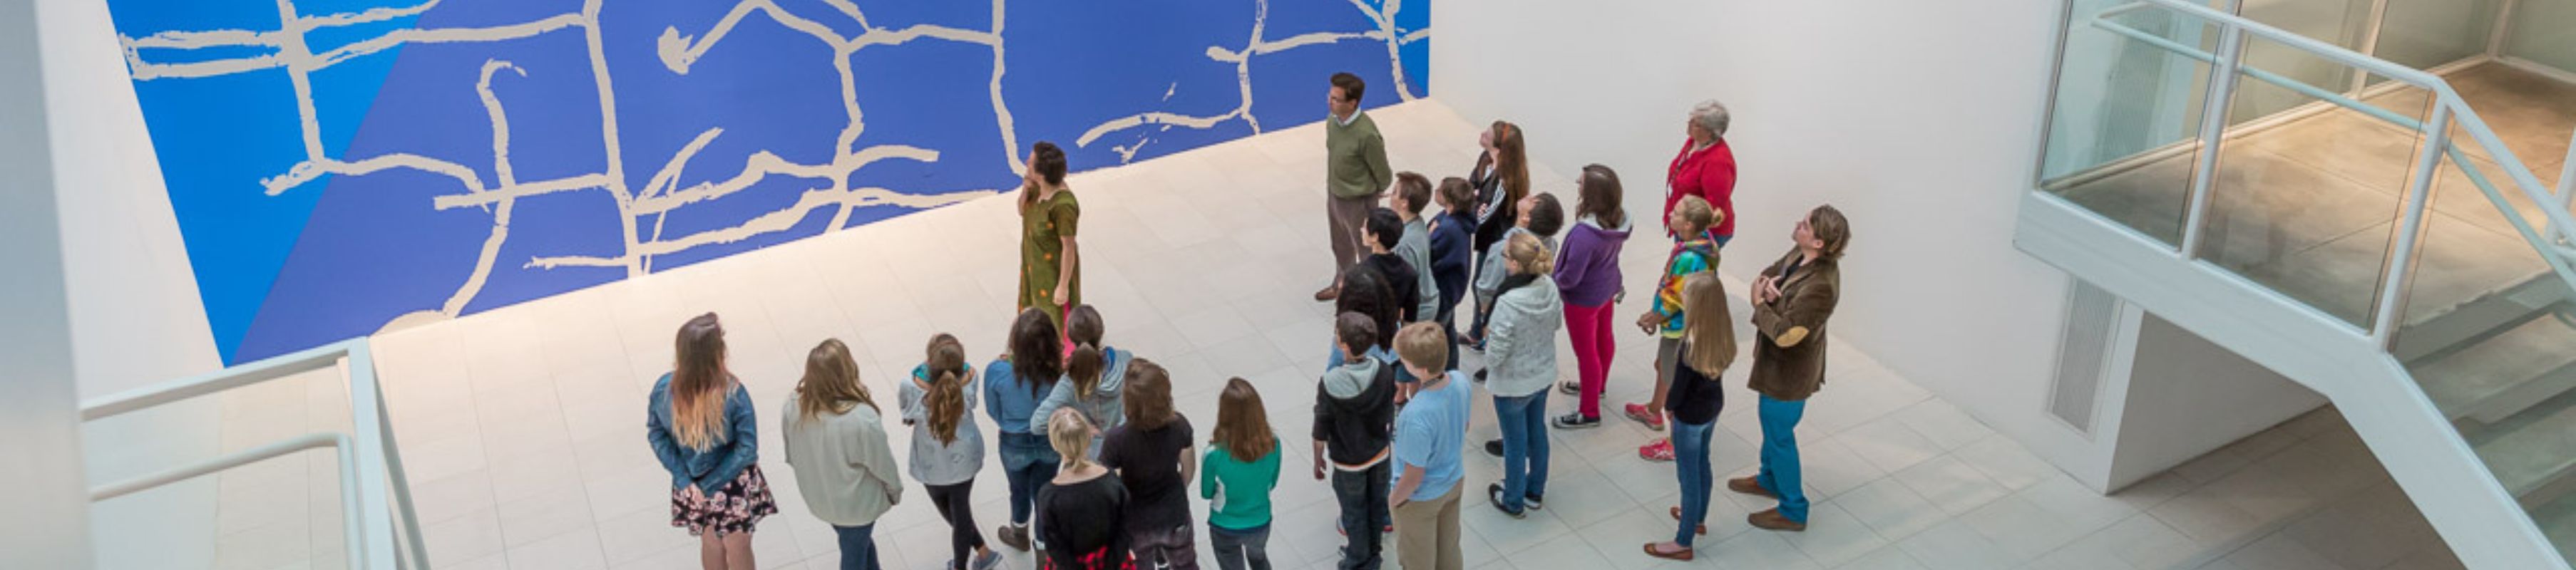 a group of children part of a school tour look up at artwork in the Atrium Gallery at MOCA